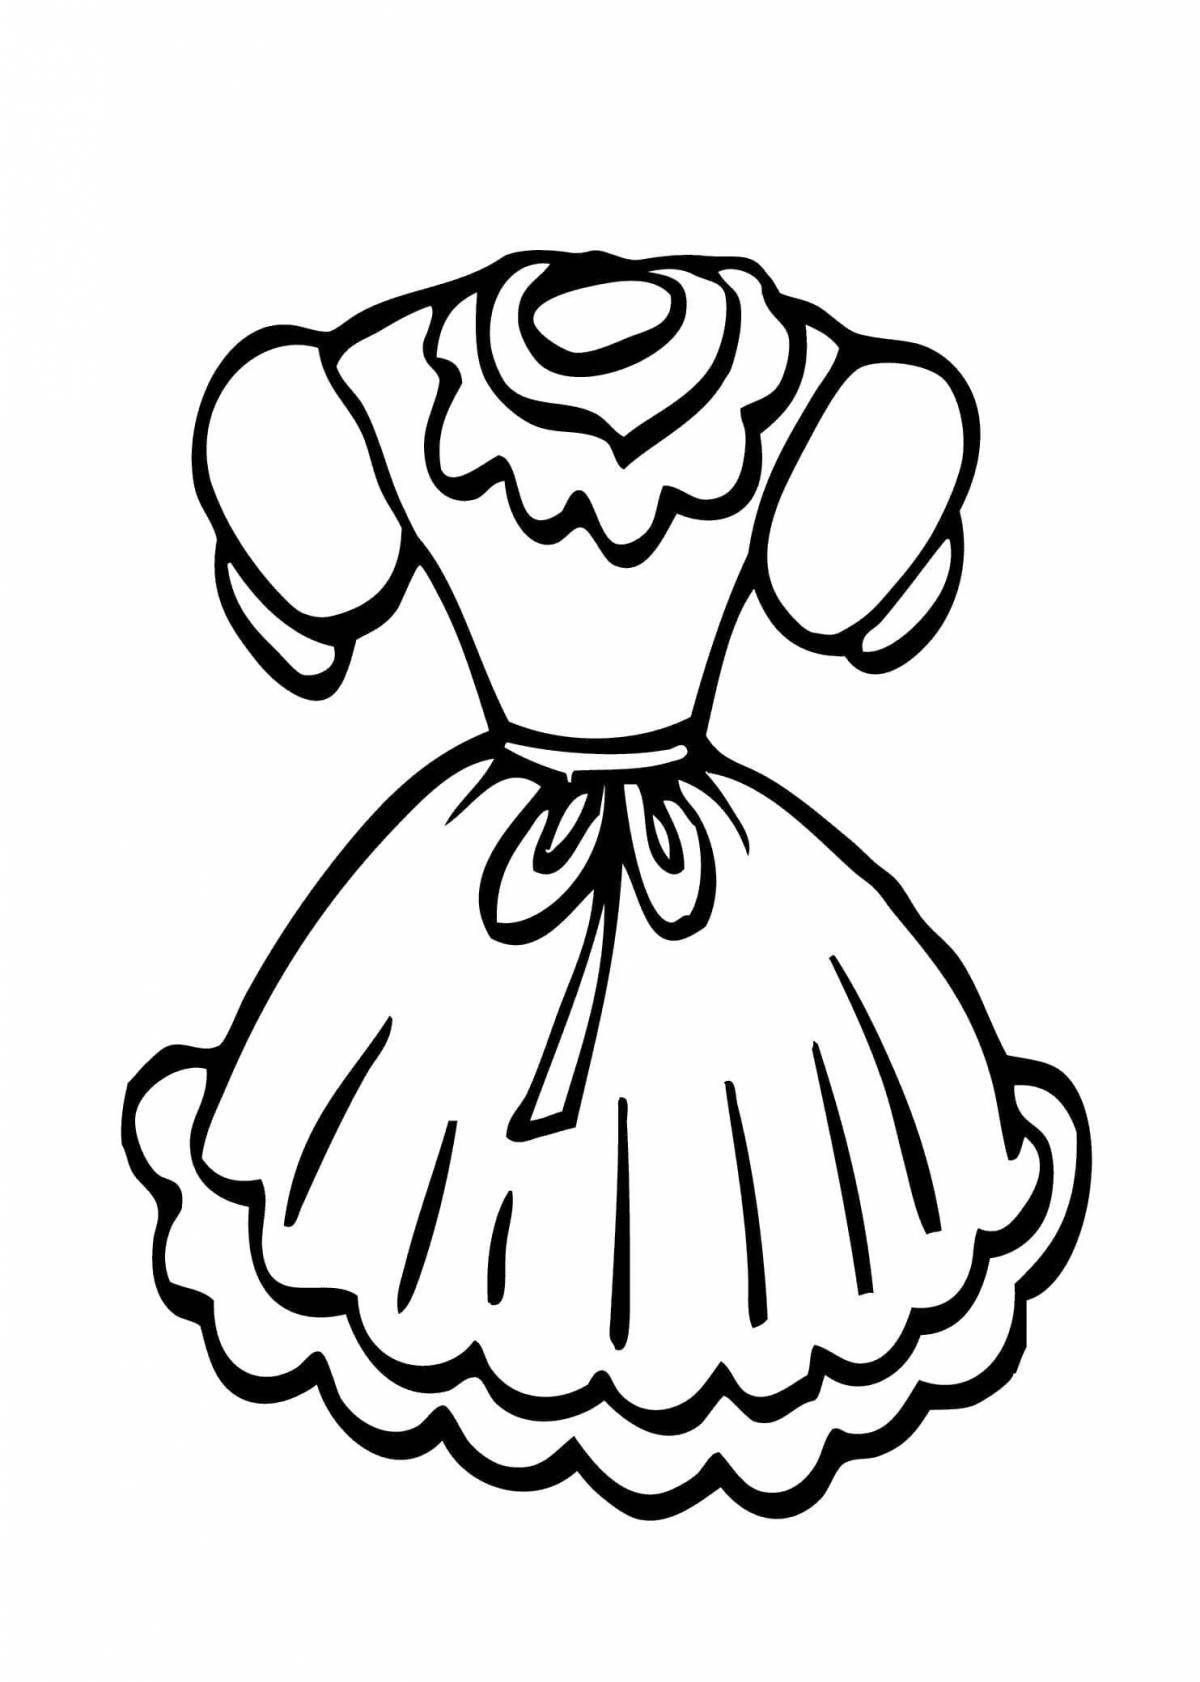 Coloring page exquisite dress for kids